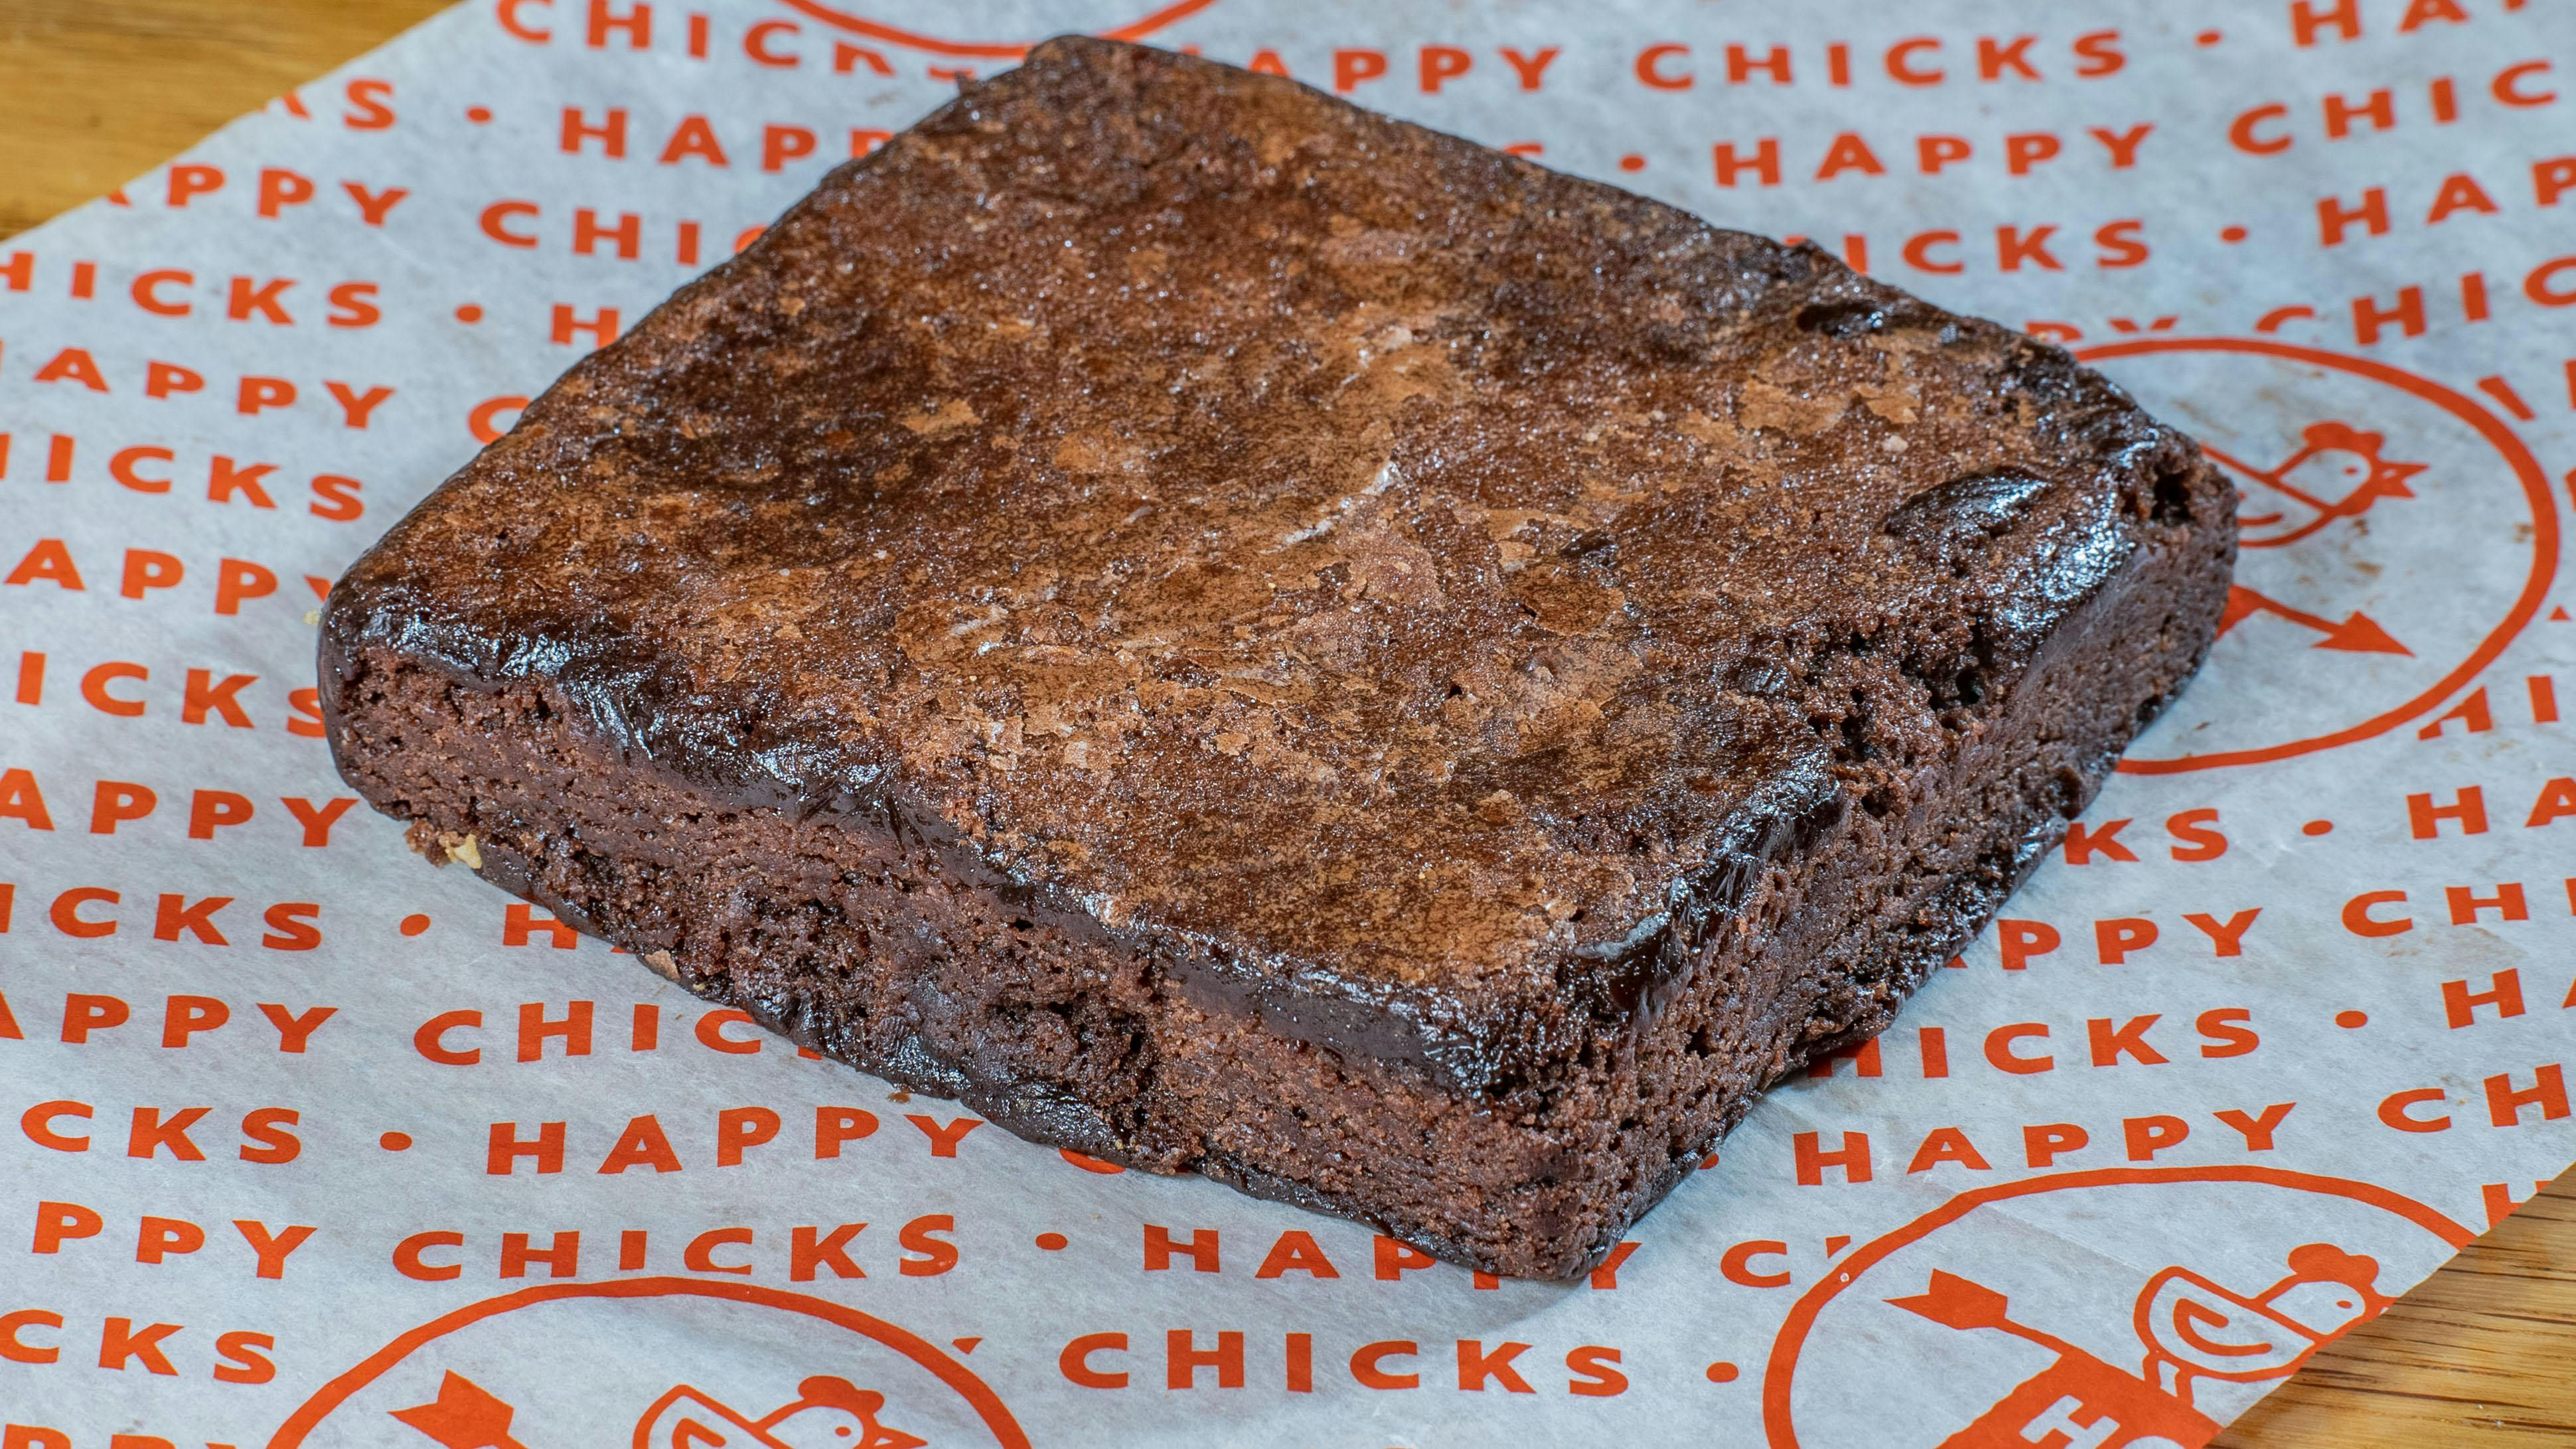 Brownie from Happy Chicks - Research Blvd in Austin, TX